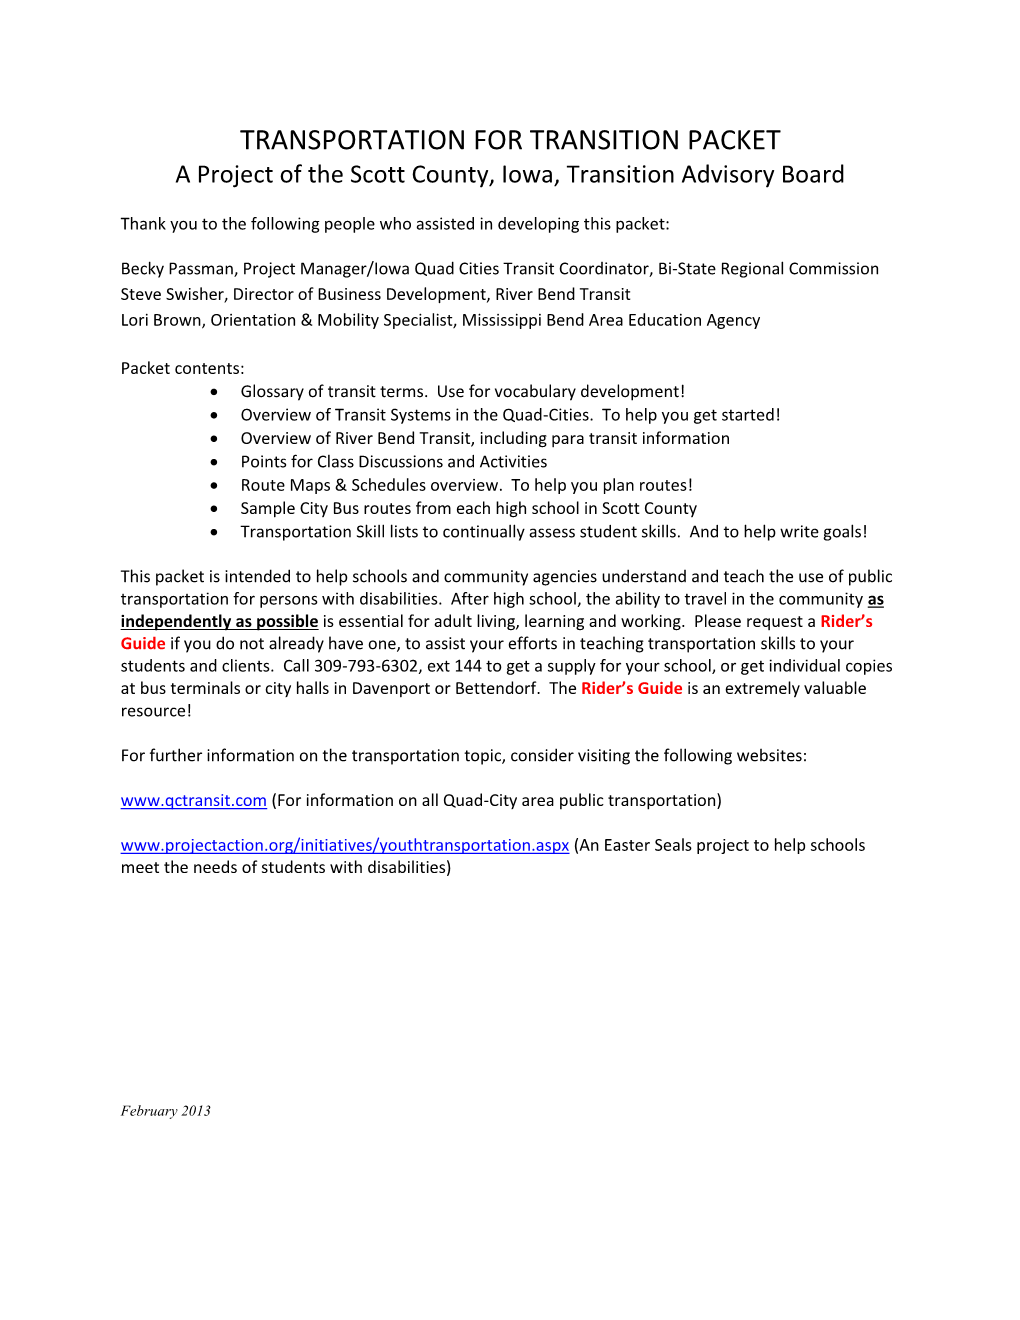 TRANSPORTATION for TRANSITION PACKET a Project of the Scott County, Iowa, Transition Advisory Board